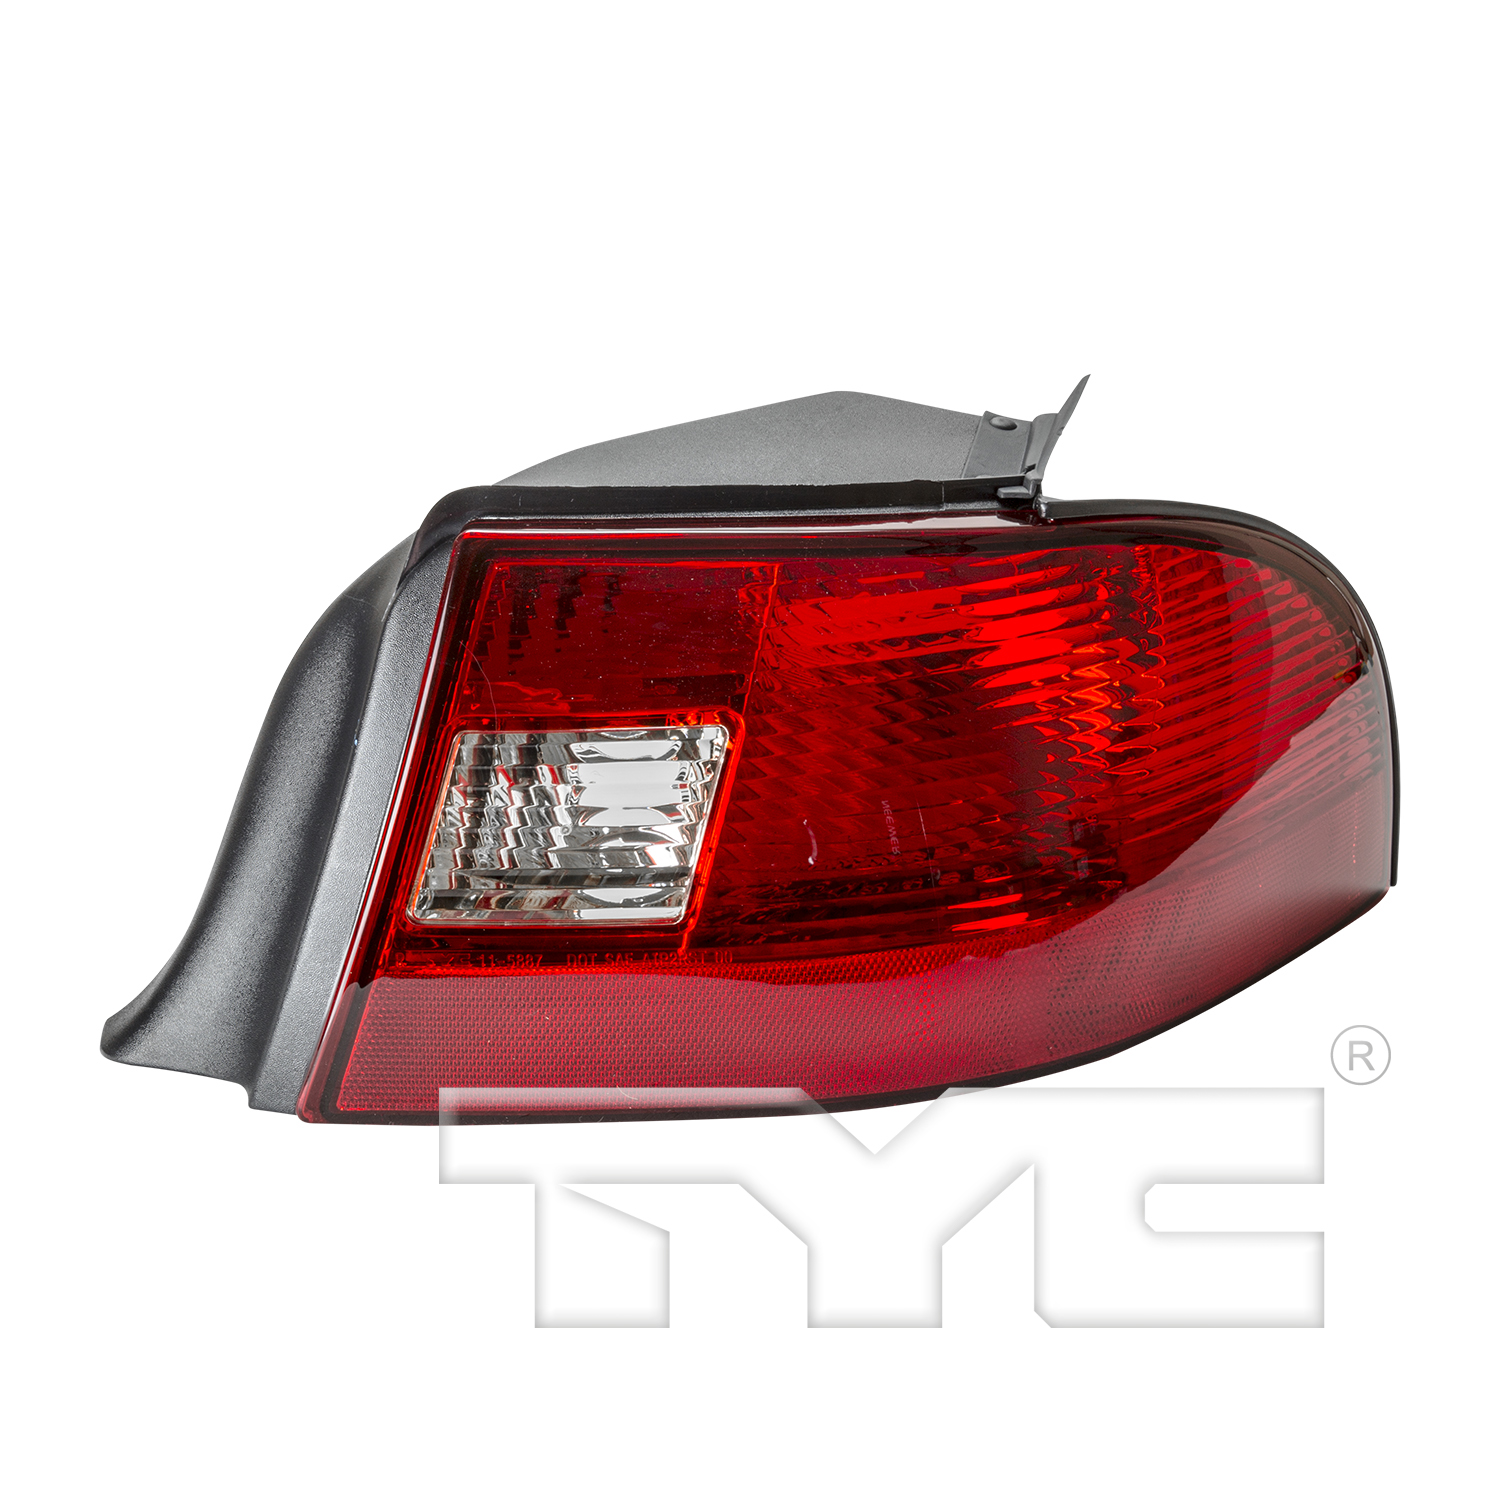 Aftermarket TAILLIGHTS for MERCURY - SABLE, SABLE,00-03,RT Taillamp assy